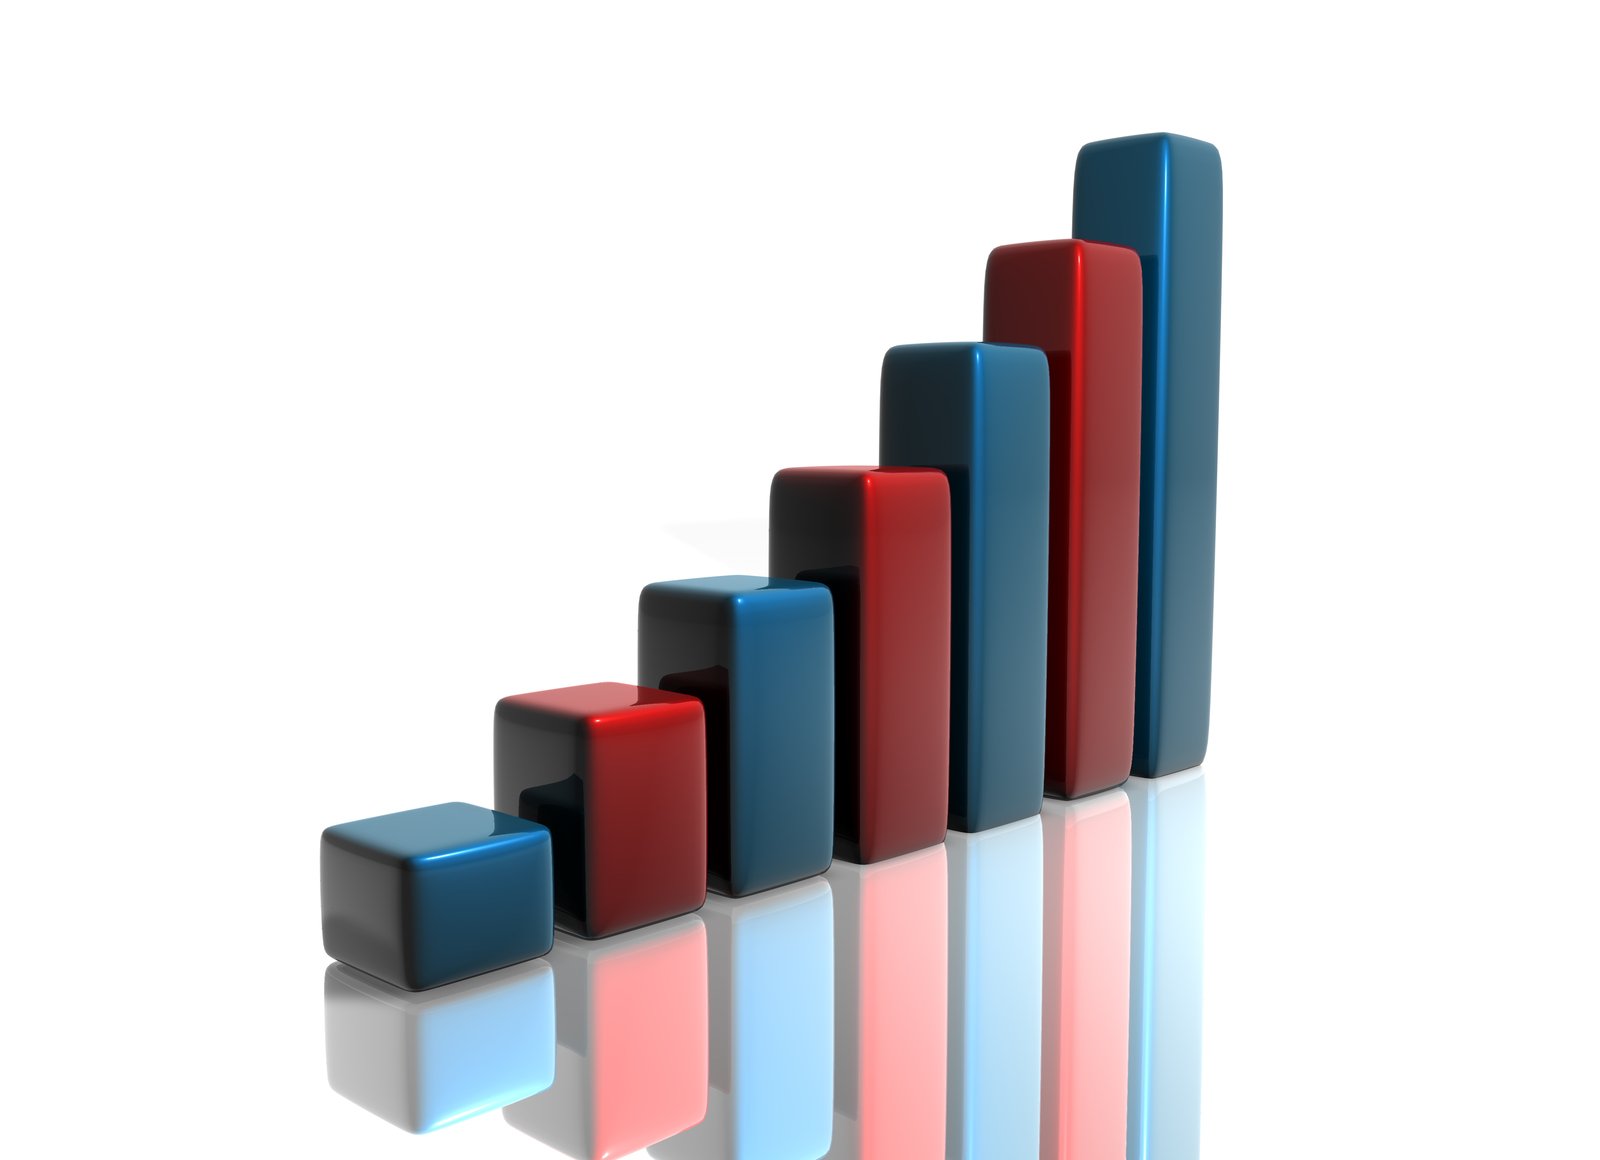 a bar chart with red, blue and green bars